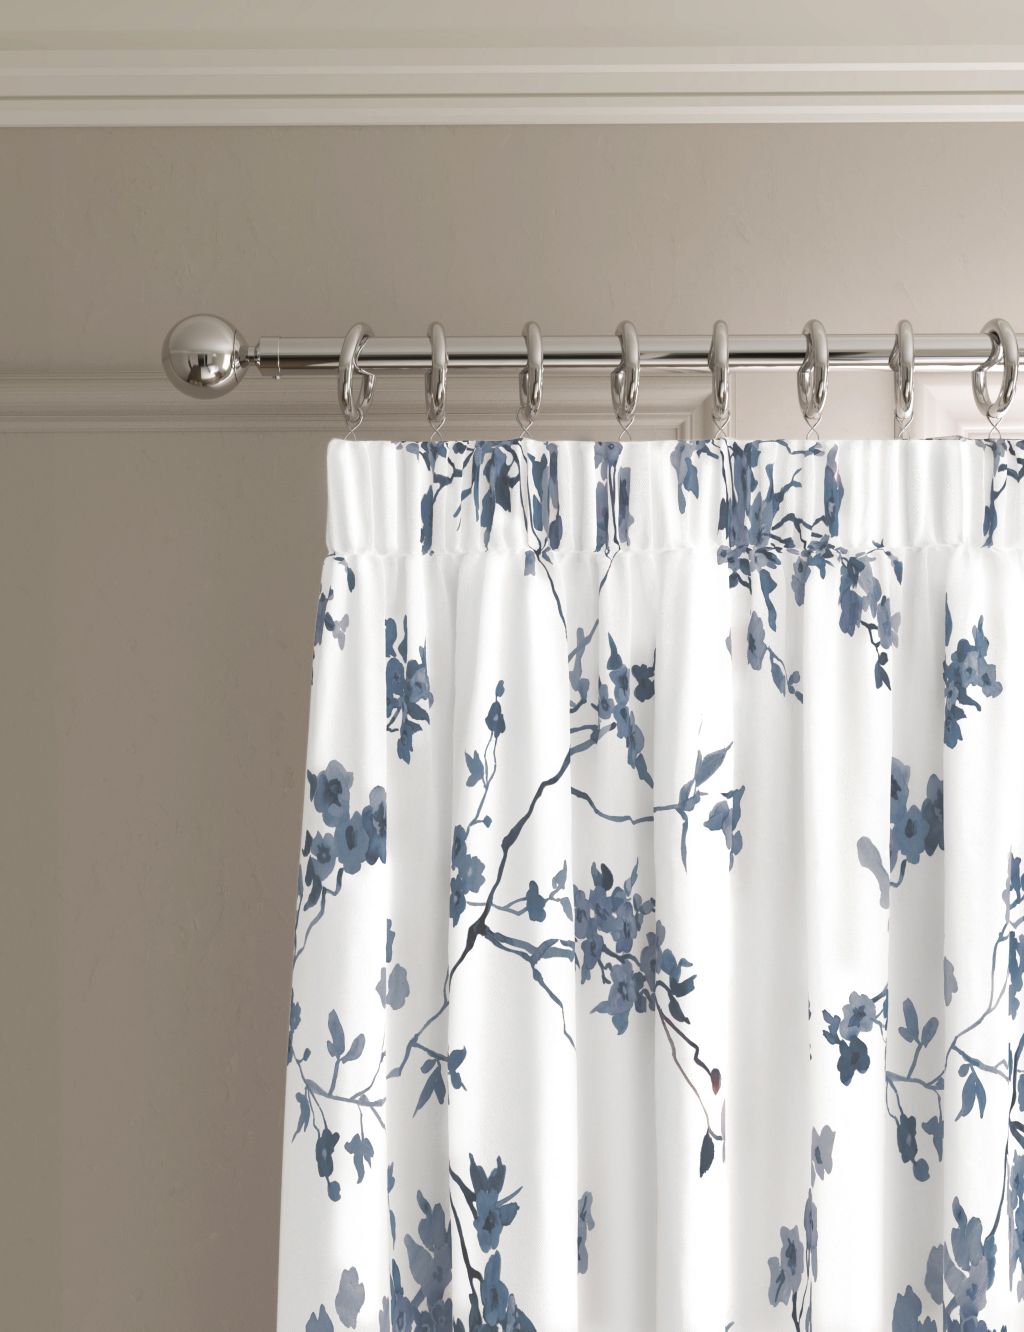 Sateen Cherry Blossom Pencil Pleat Blackout Curtains image 1